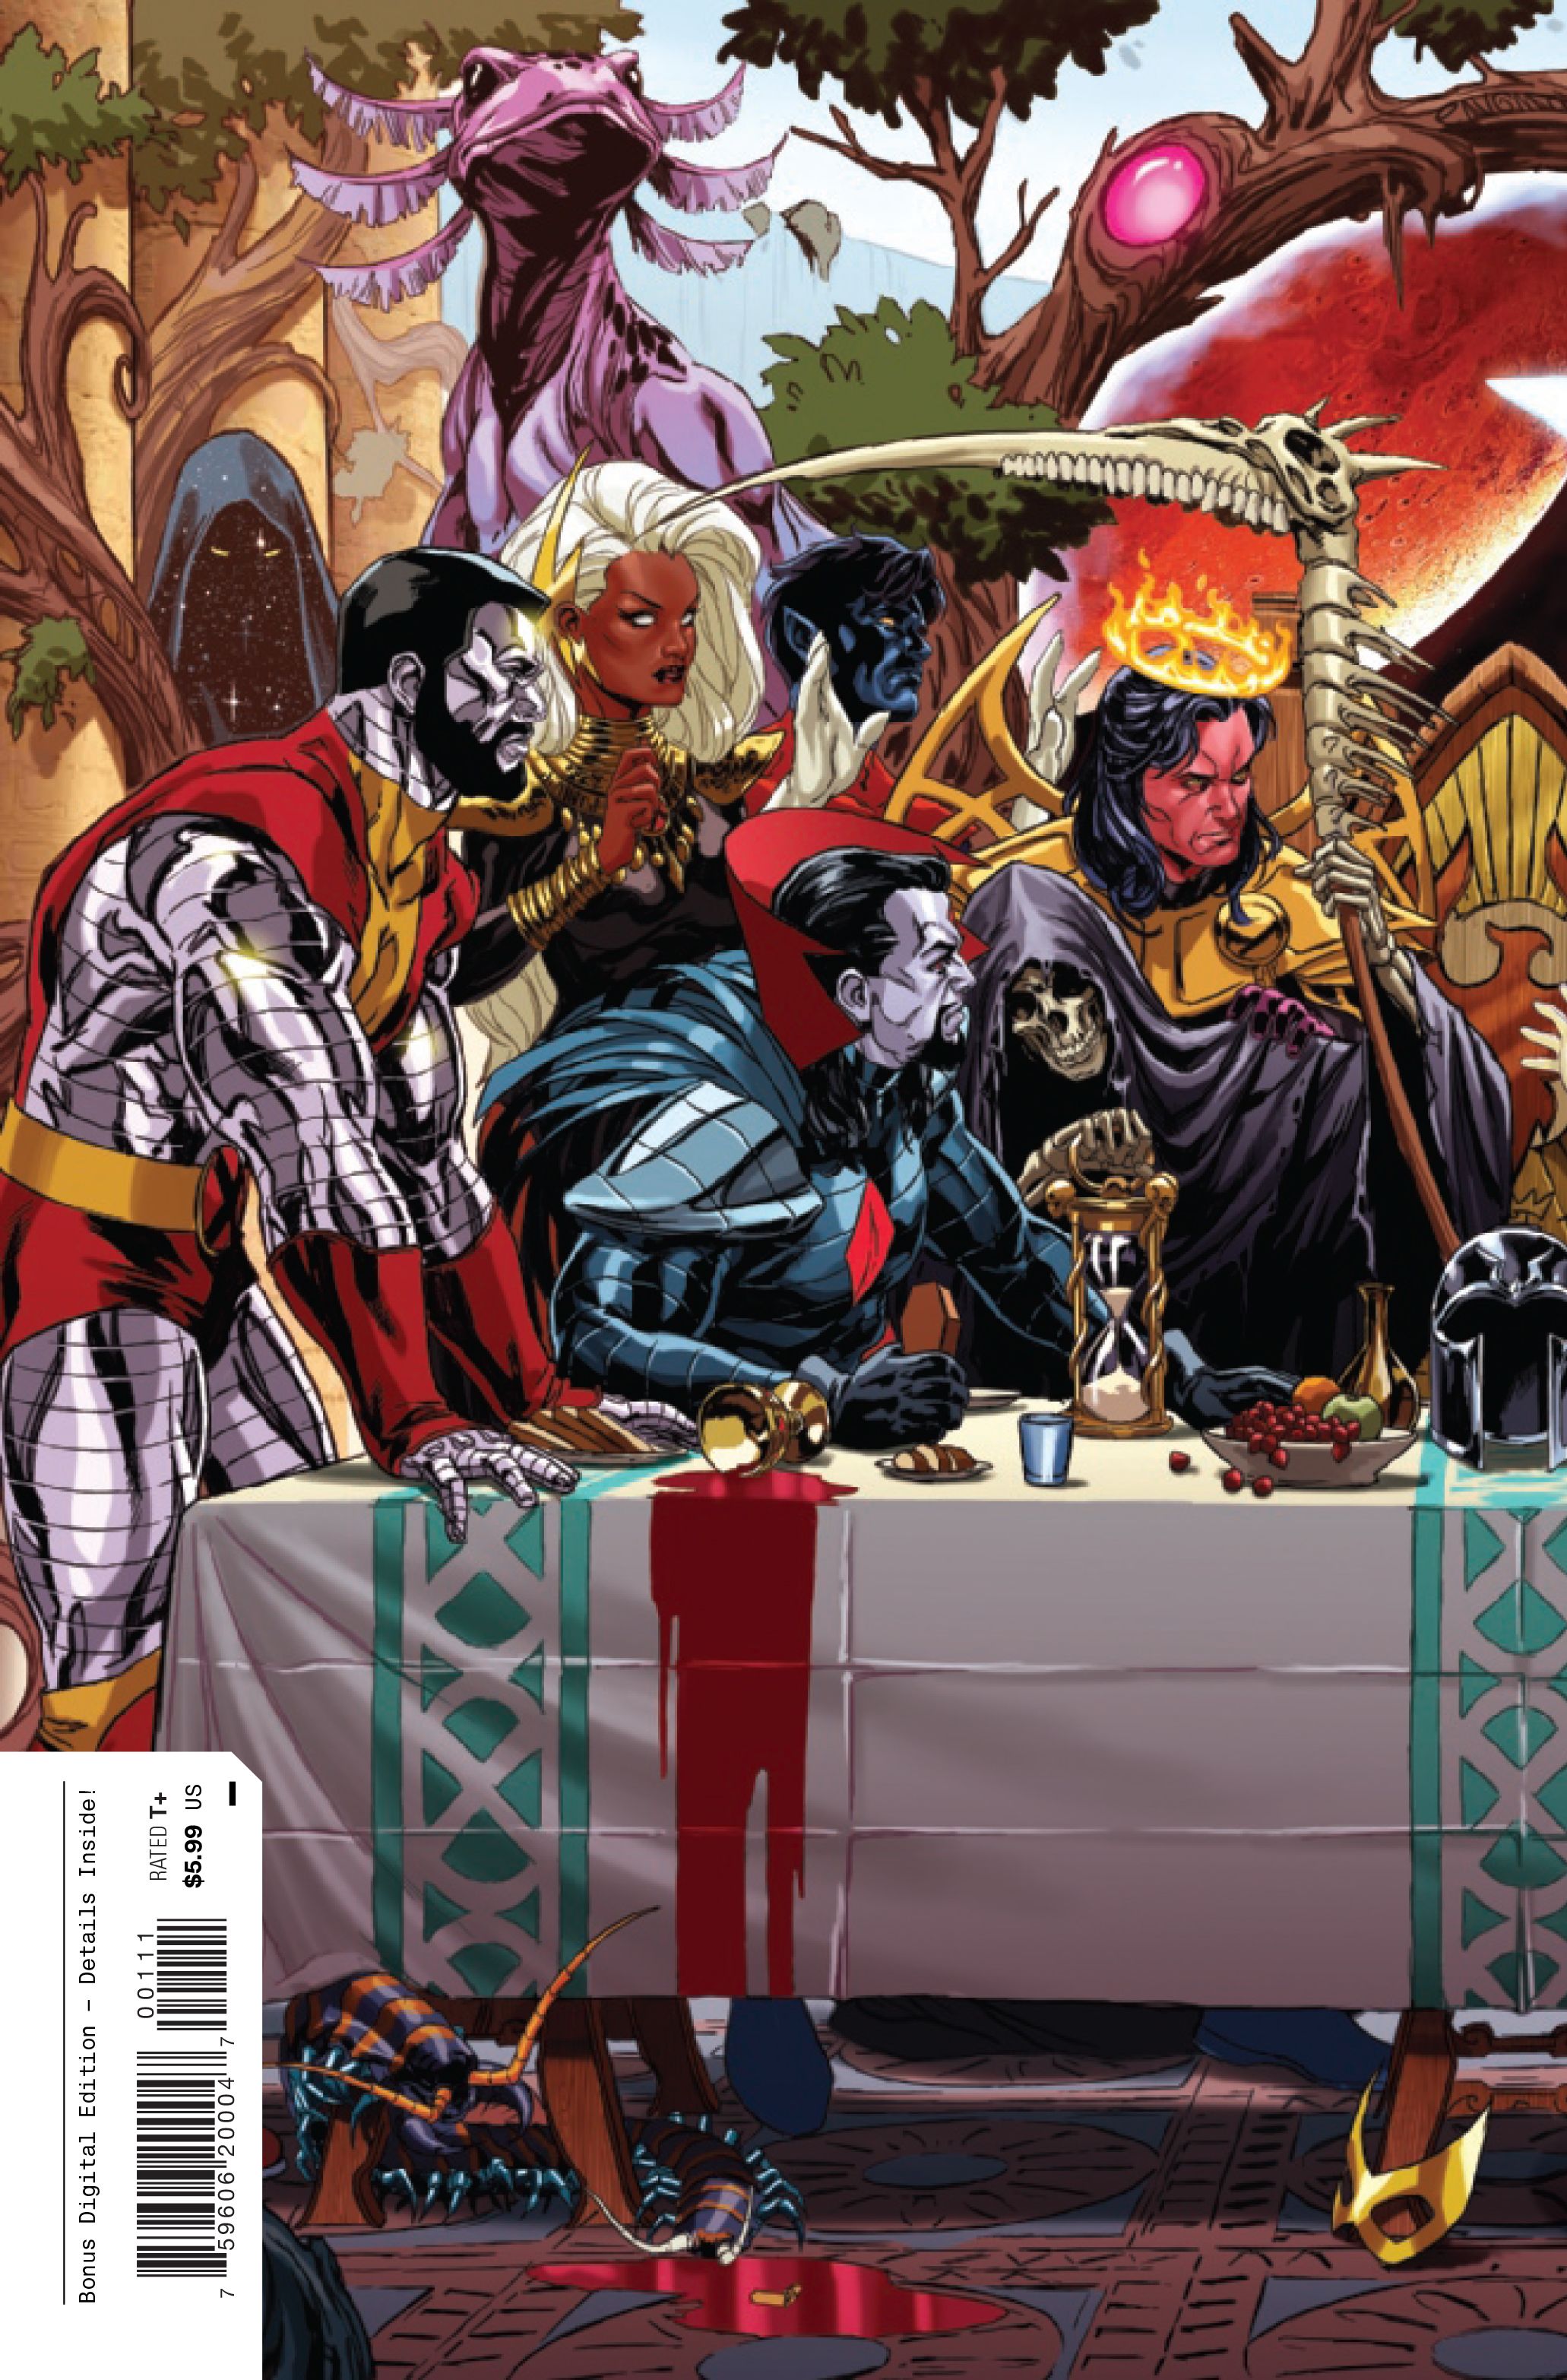 Cover for Immortal X-Men #1, by Kieron Gillen and Lucas Werneck.